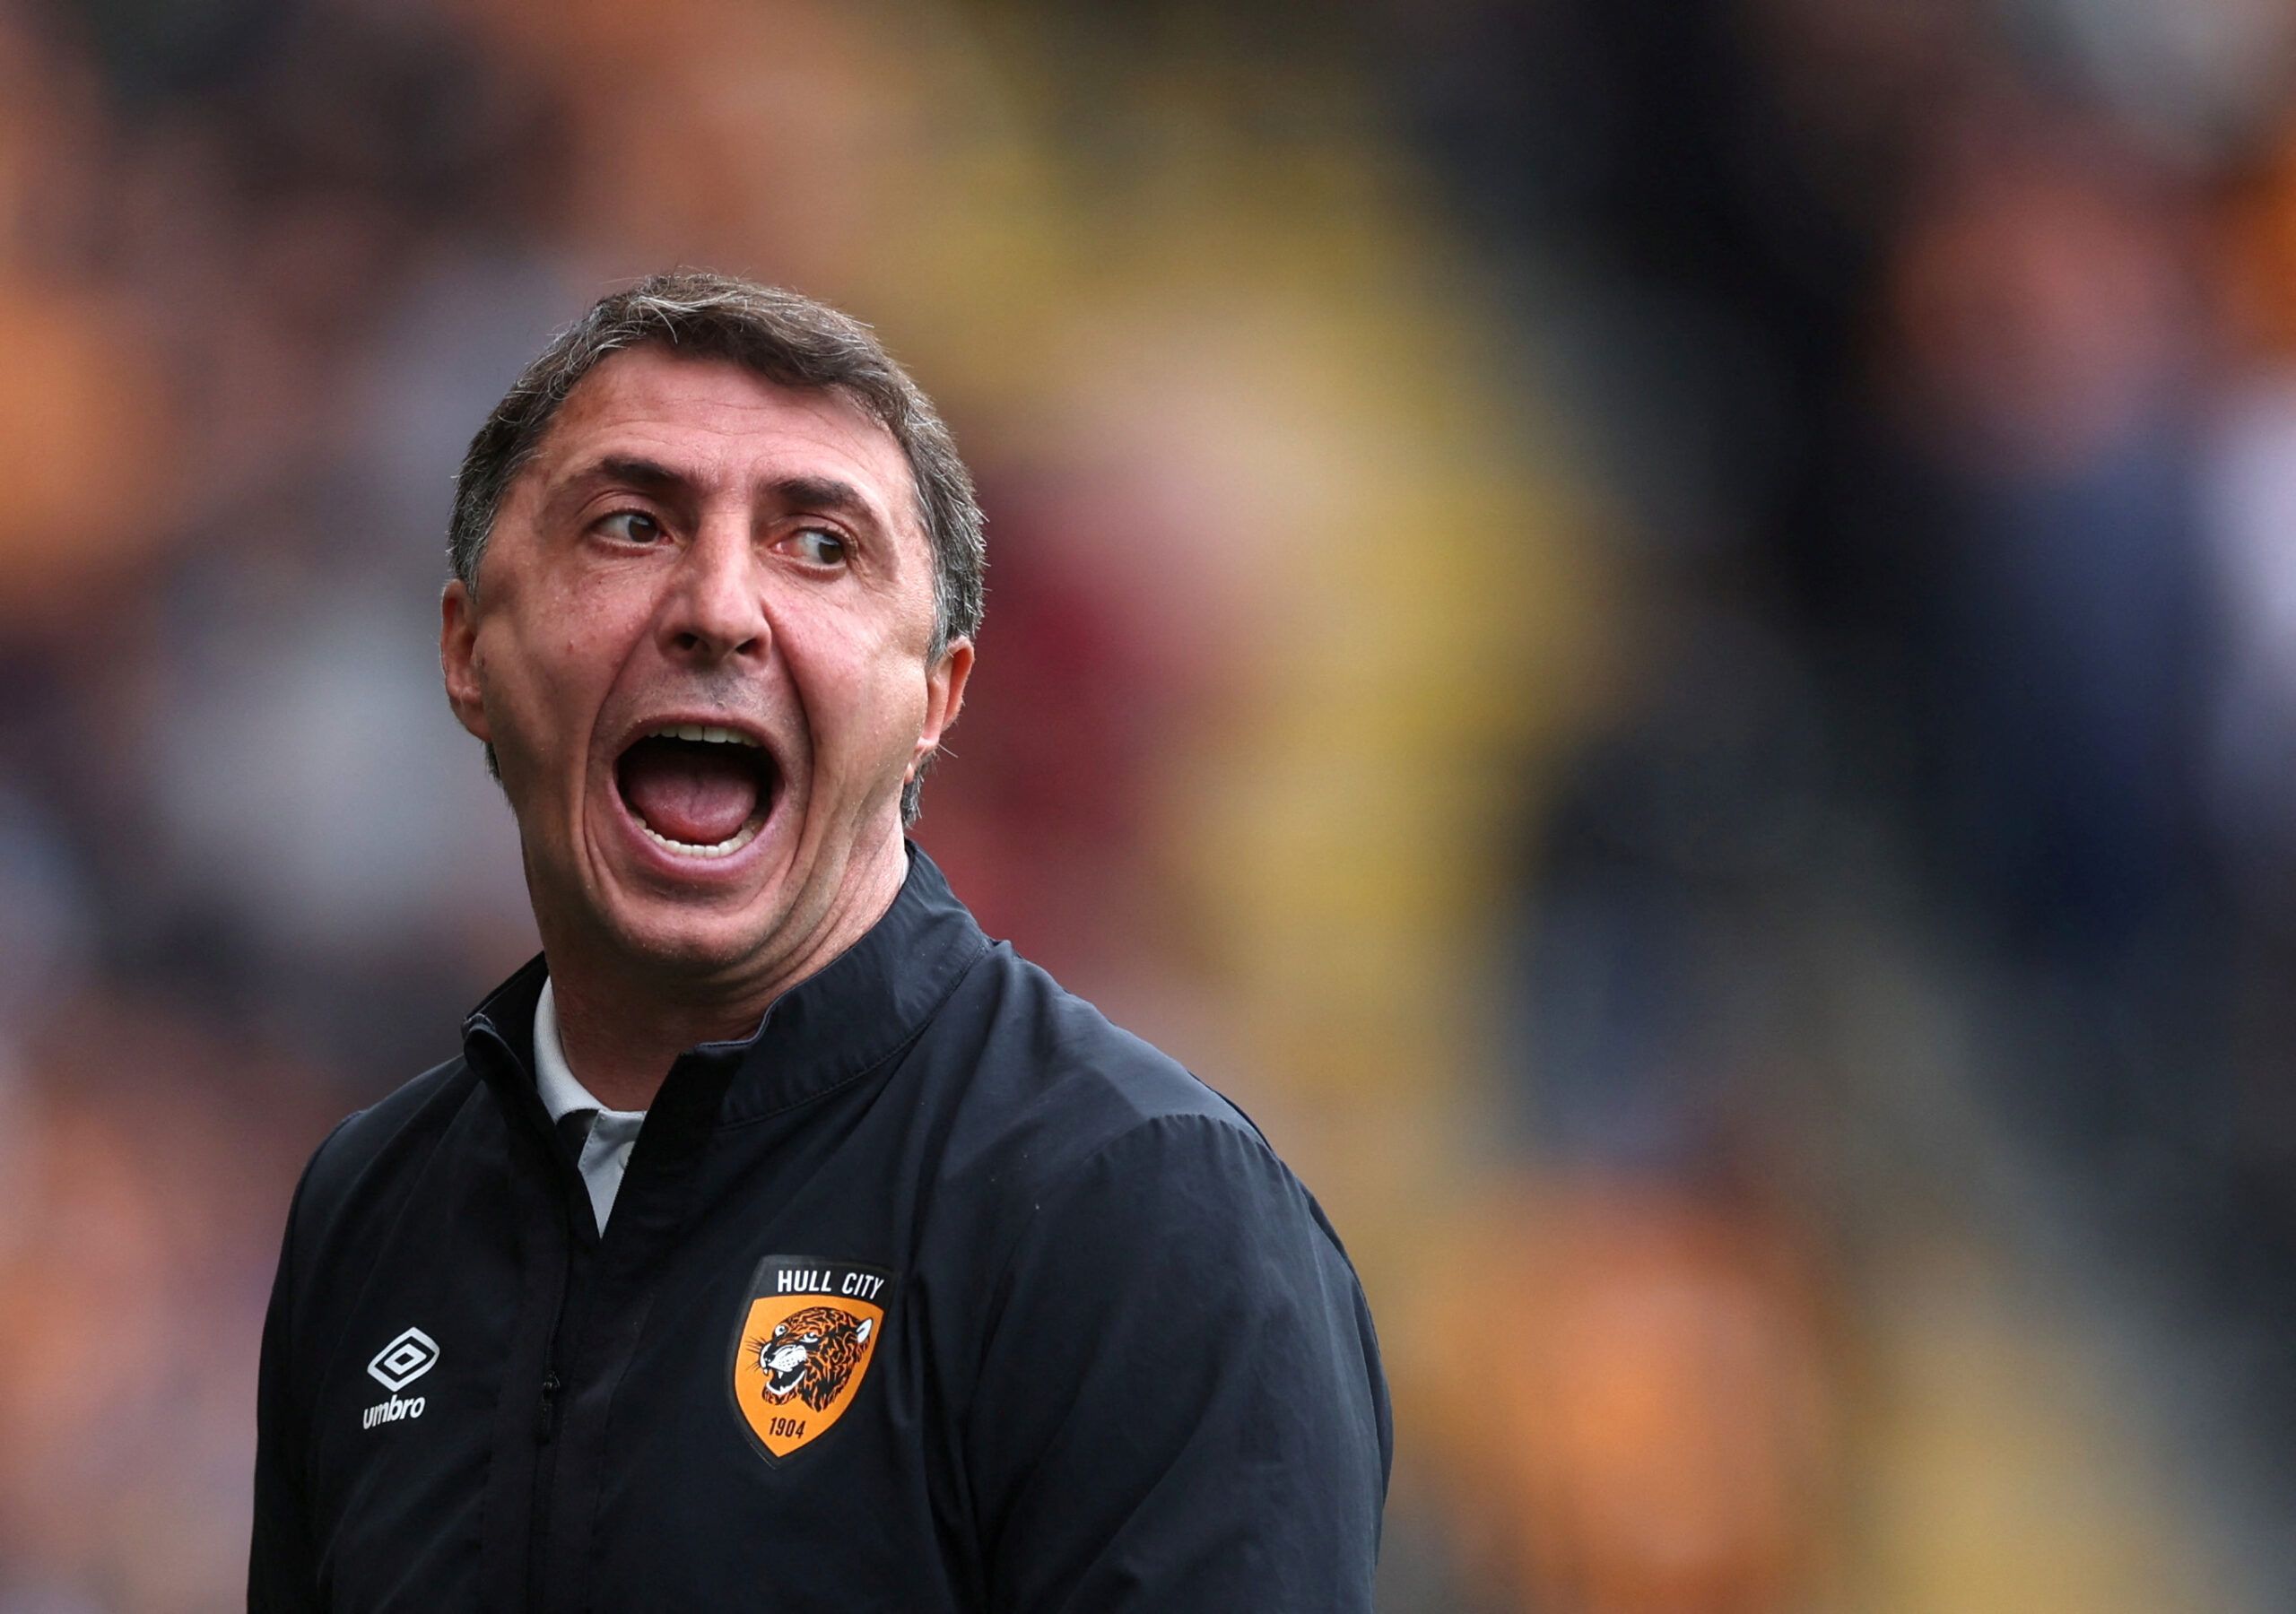 Soccer Football - Championship - Hull City v Sheffield United - MKM Stadium, Hull, Britain - September 4, 2022  Hull City manager Shota Arveladze  Action Images/Lee Smith  EDITORIAL USE ONLY. No use with unauthorized audio, video, data, fixture lists, club/league logos or 